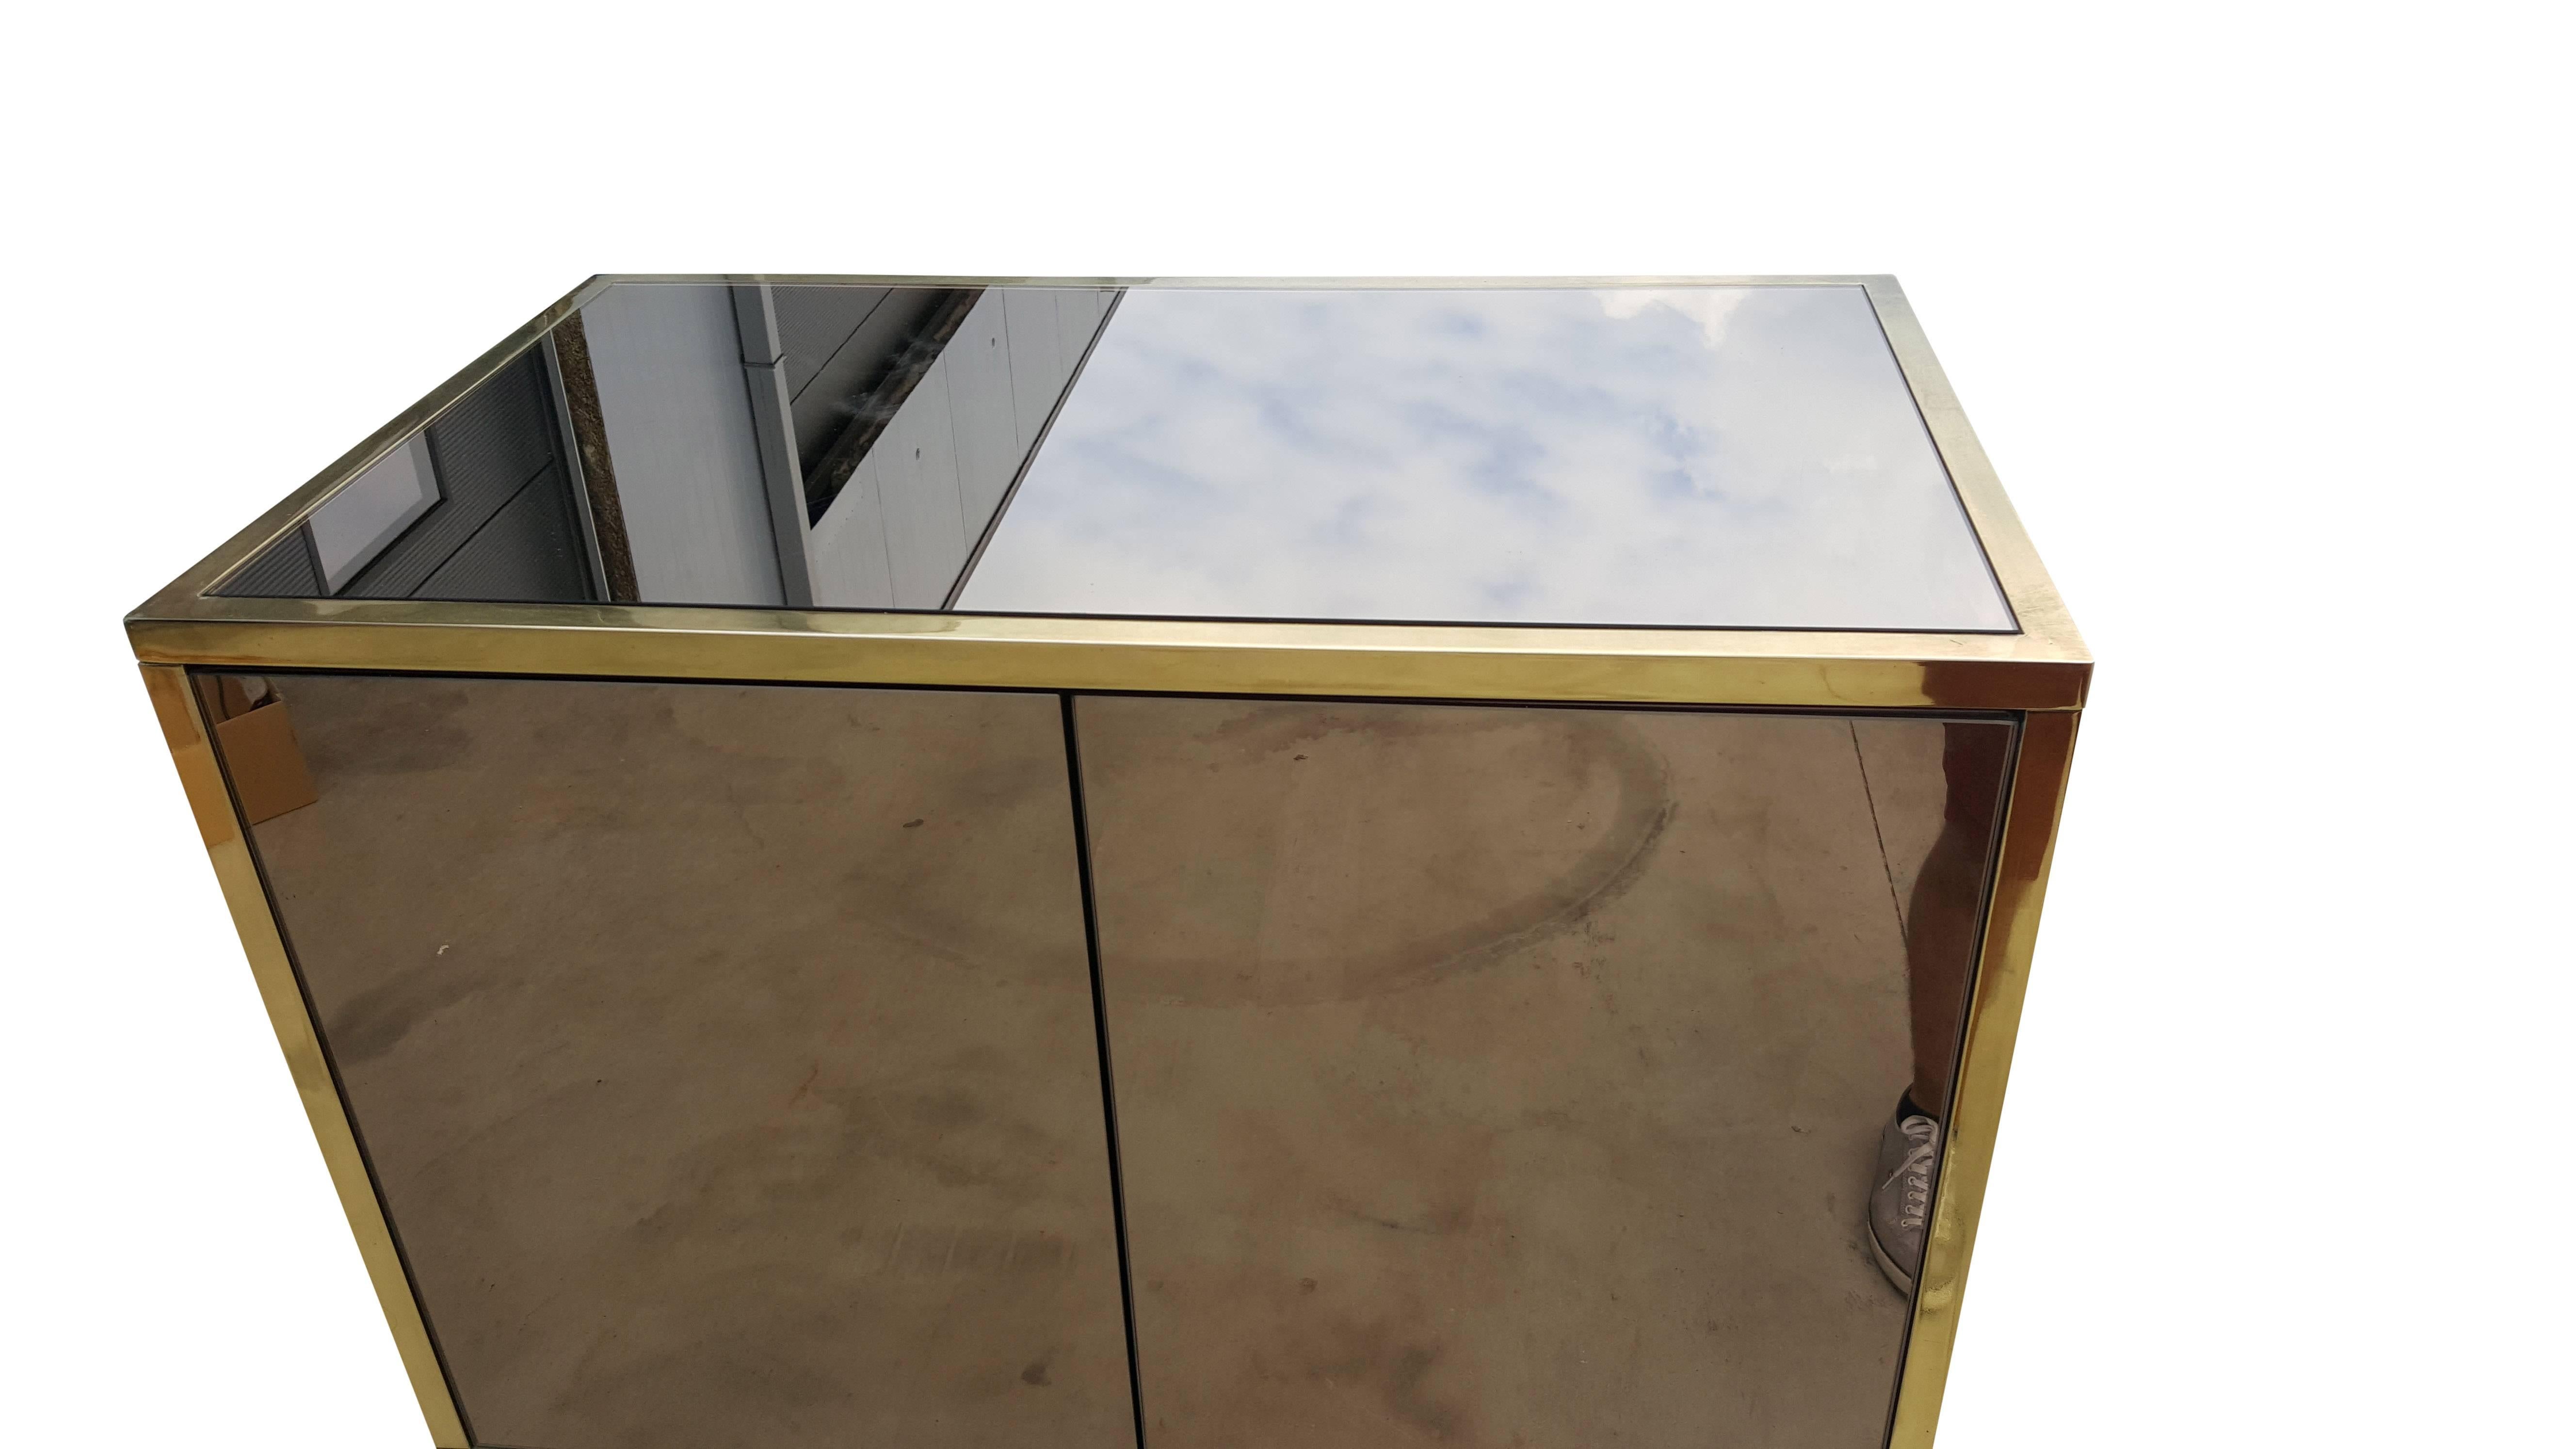 Mirrored brass bar cabinet from belgo chrome
Brass and mirrors in very good condition.
Made in the 1970s.
In the style of Maison Jansen.